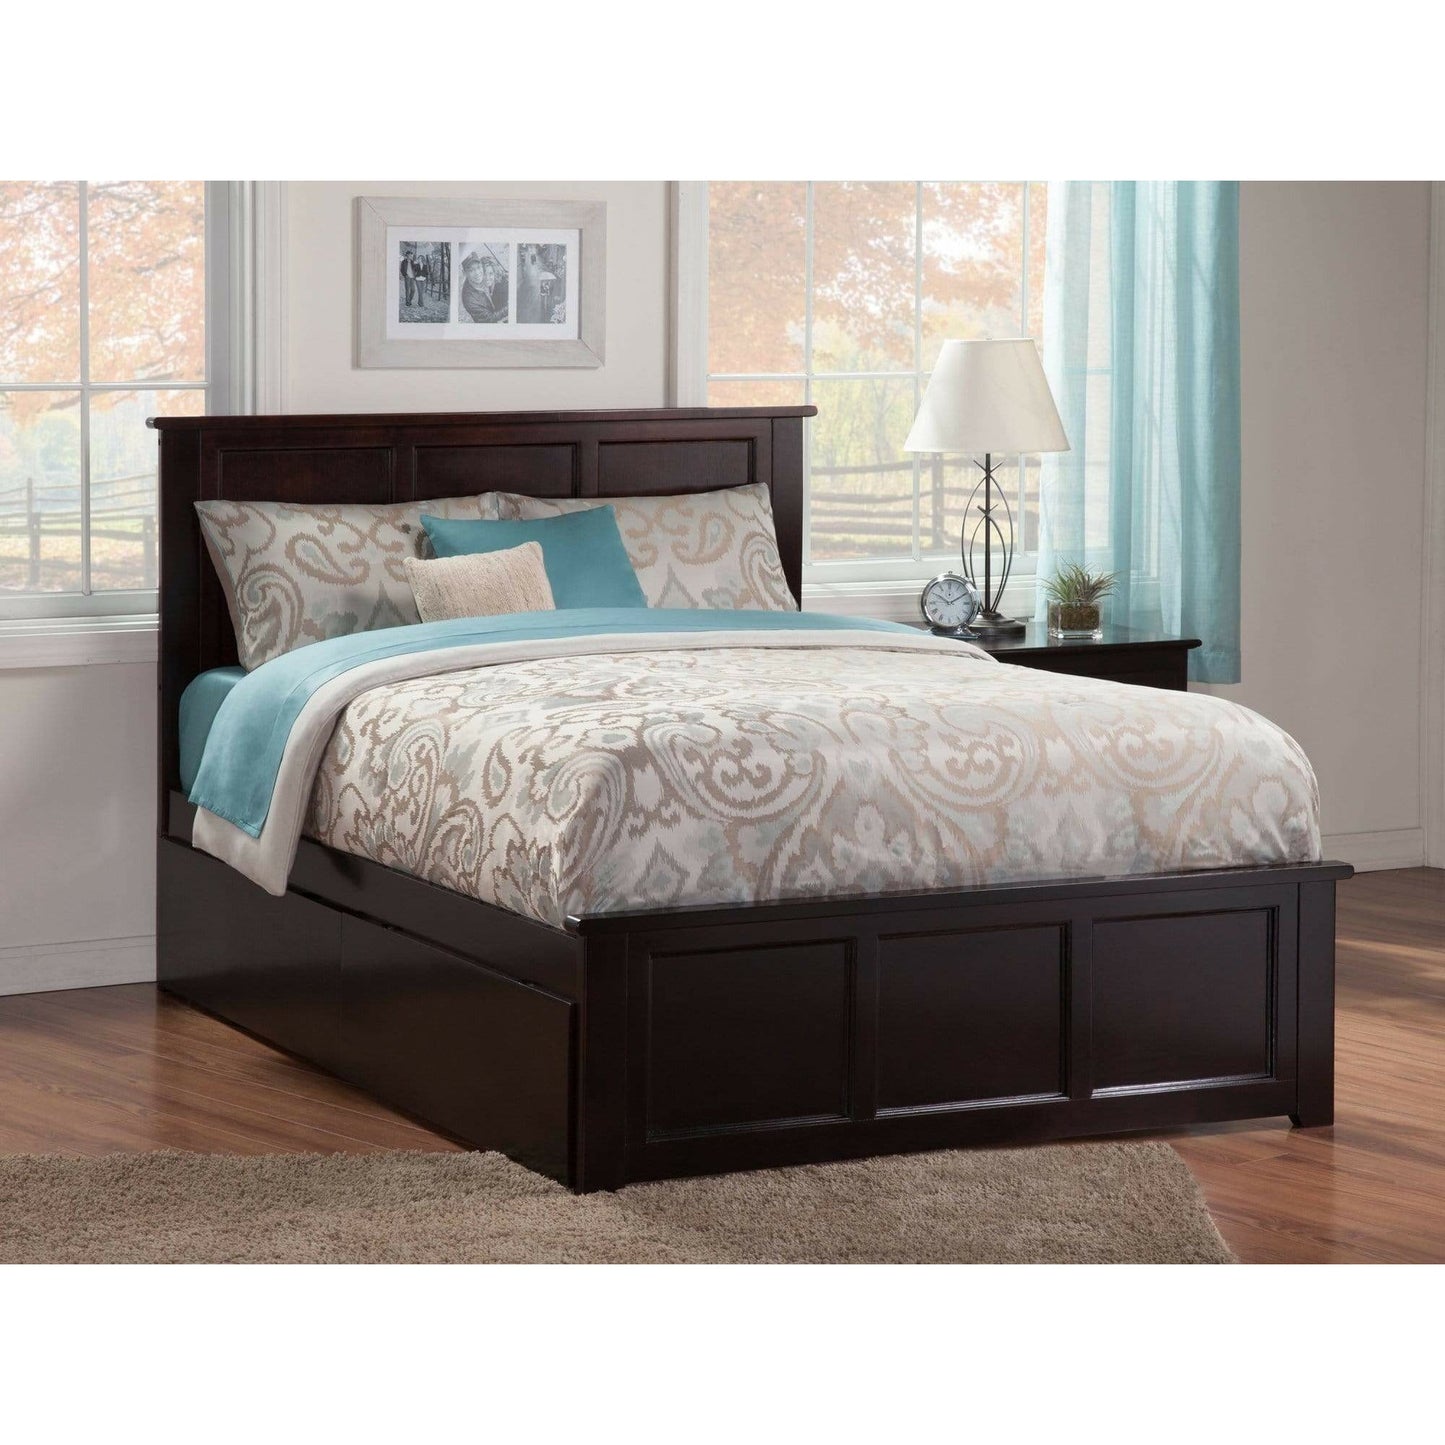 Atlantic Furniture Bed Madison Queen Platform Bed with Matching Foot Board with 2 Urban Bed Drawers in Espresso